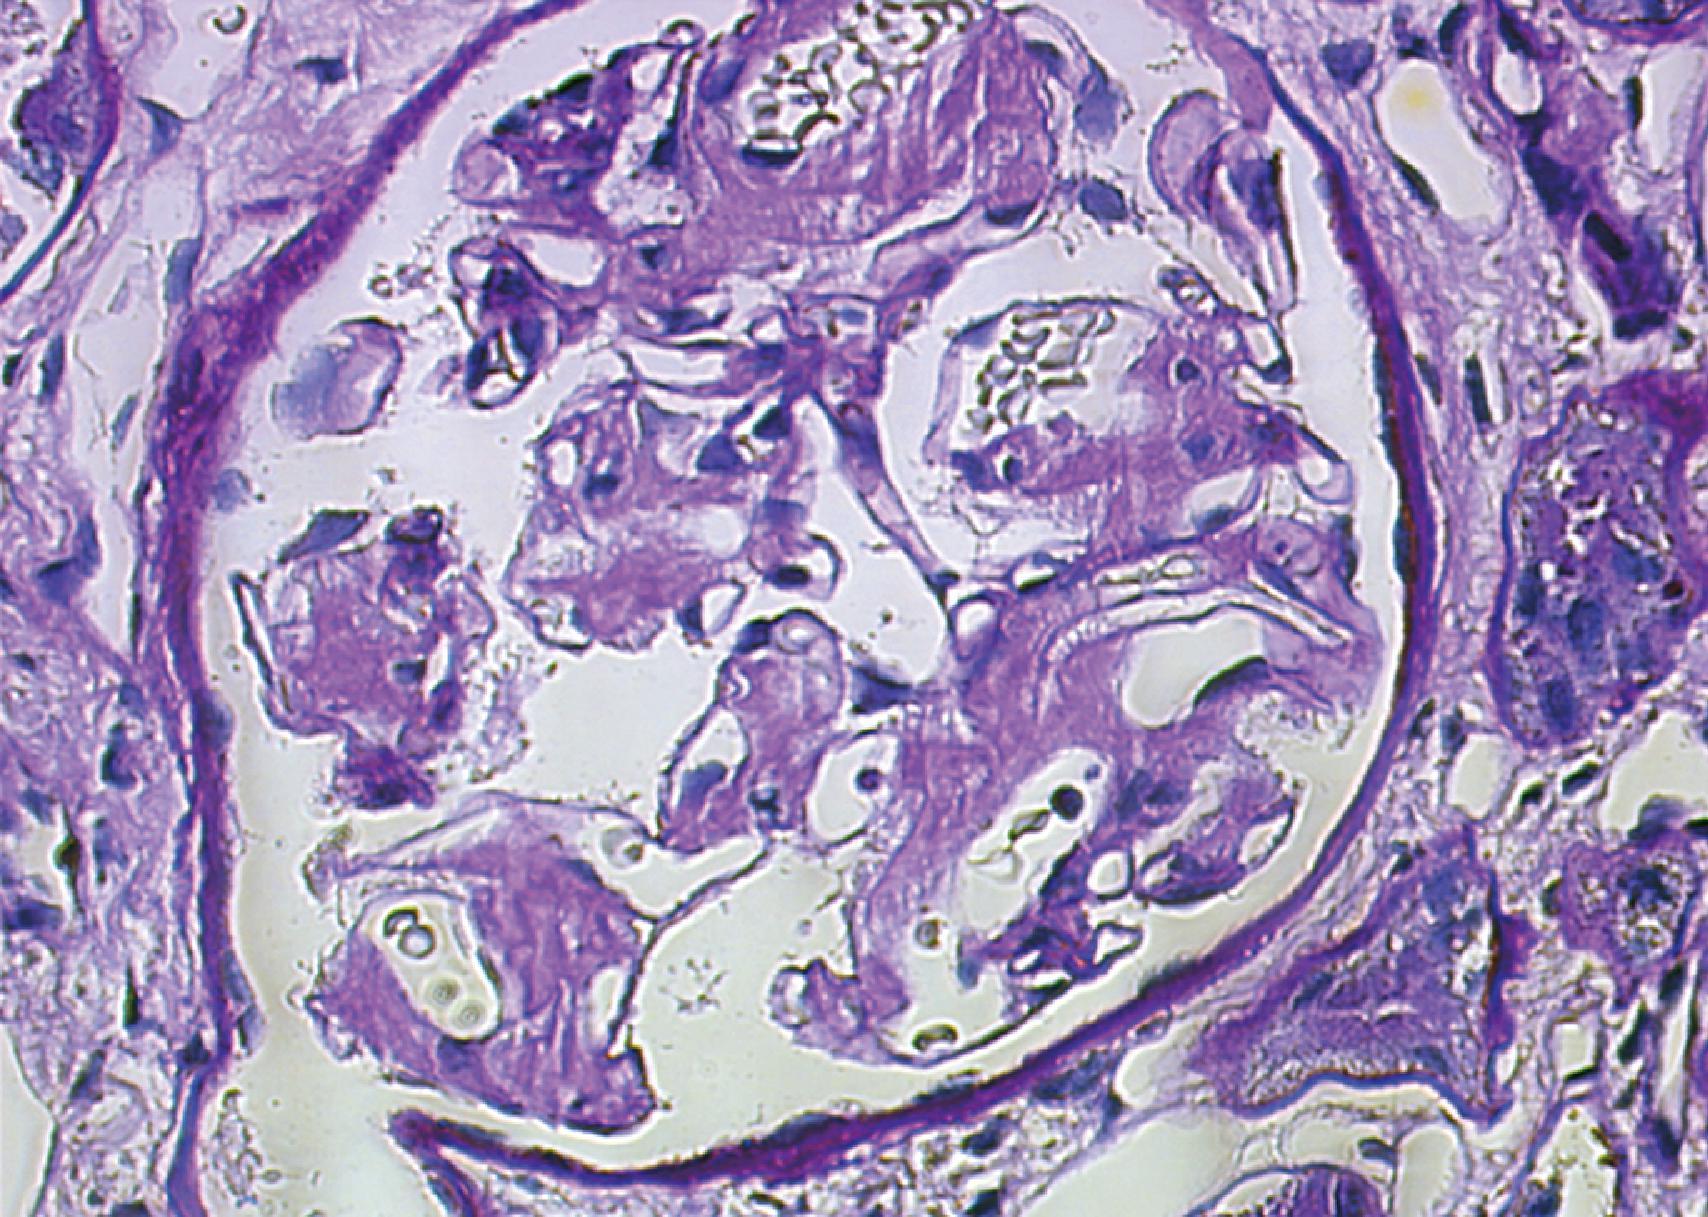 Fig. 28.2, Glomerulus from a patient with AL-type amyloidosis, showing segmentally variable accumulation of amorphous acidophilic material that is effacing portions of the glomerular architecture (PASH stain, magnification × 40).